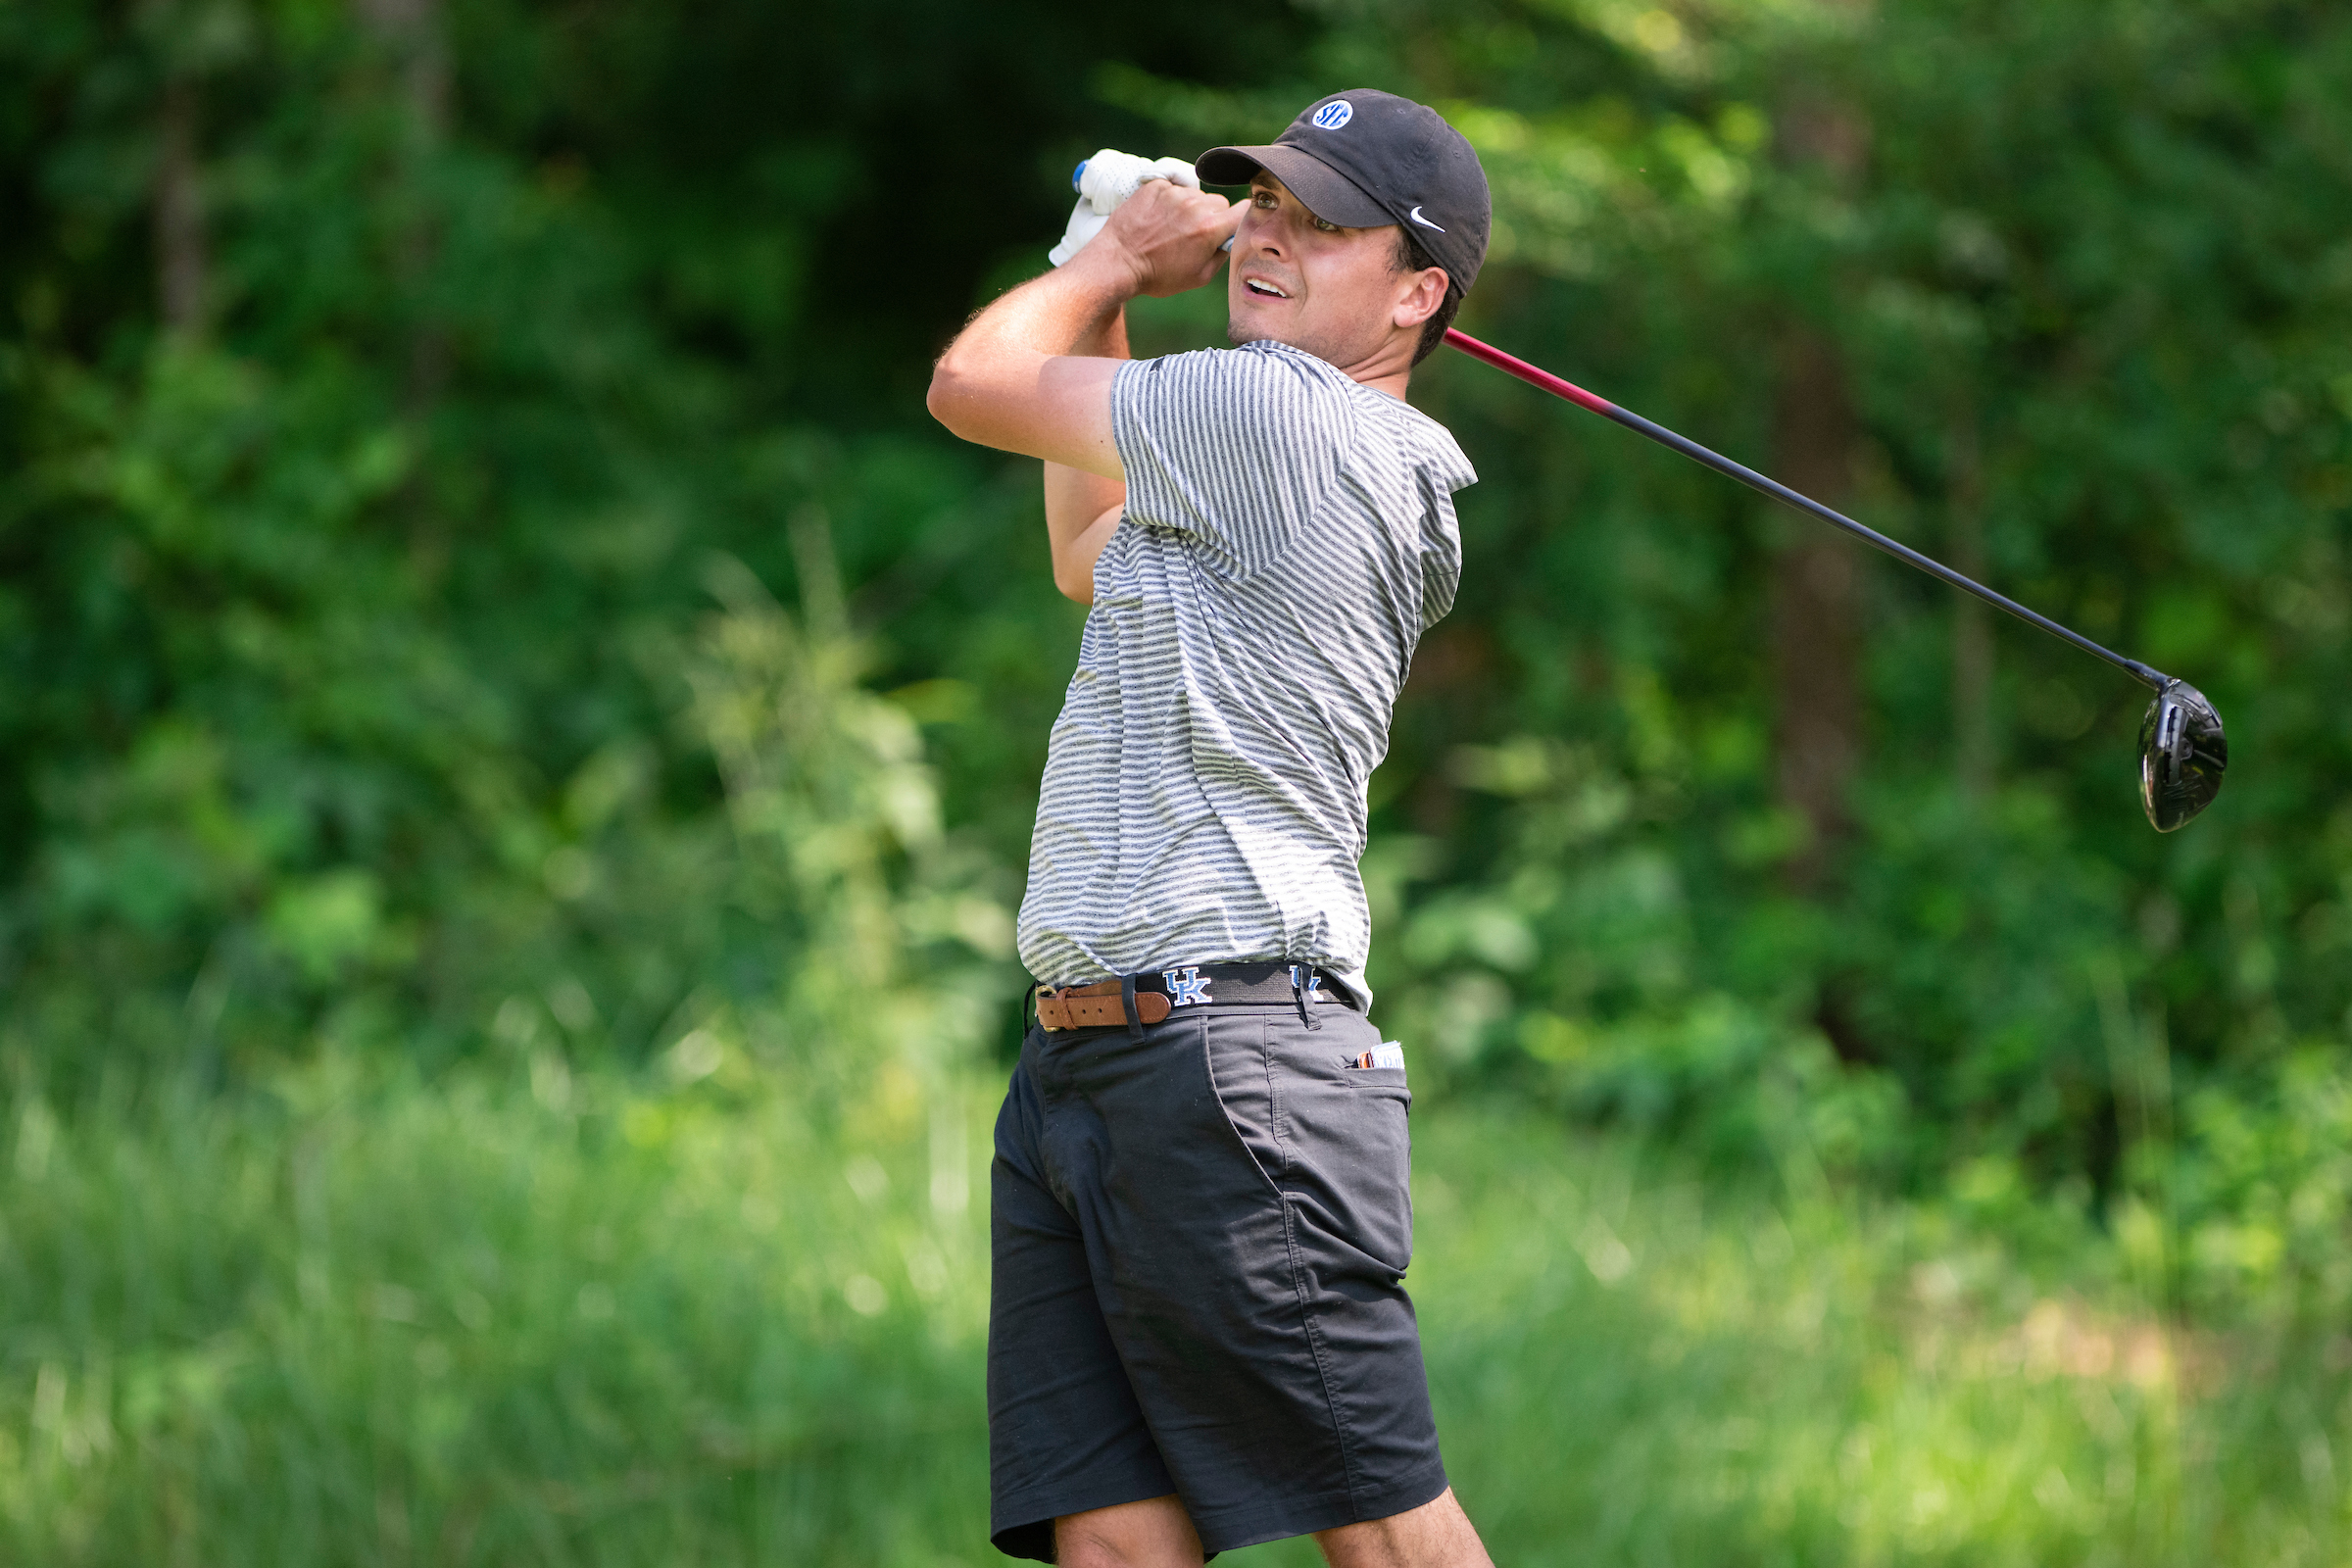 Alex Goff Cards 68, Kentucky Ties for Eighth at Gators Invitational